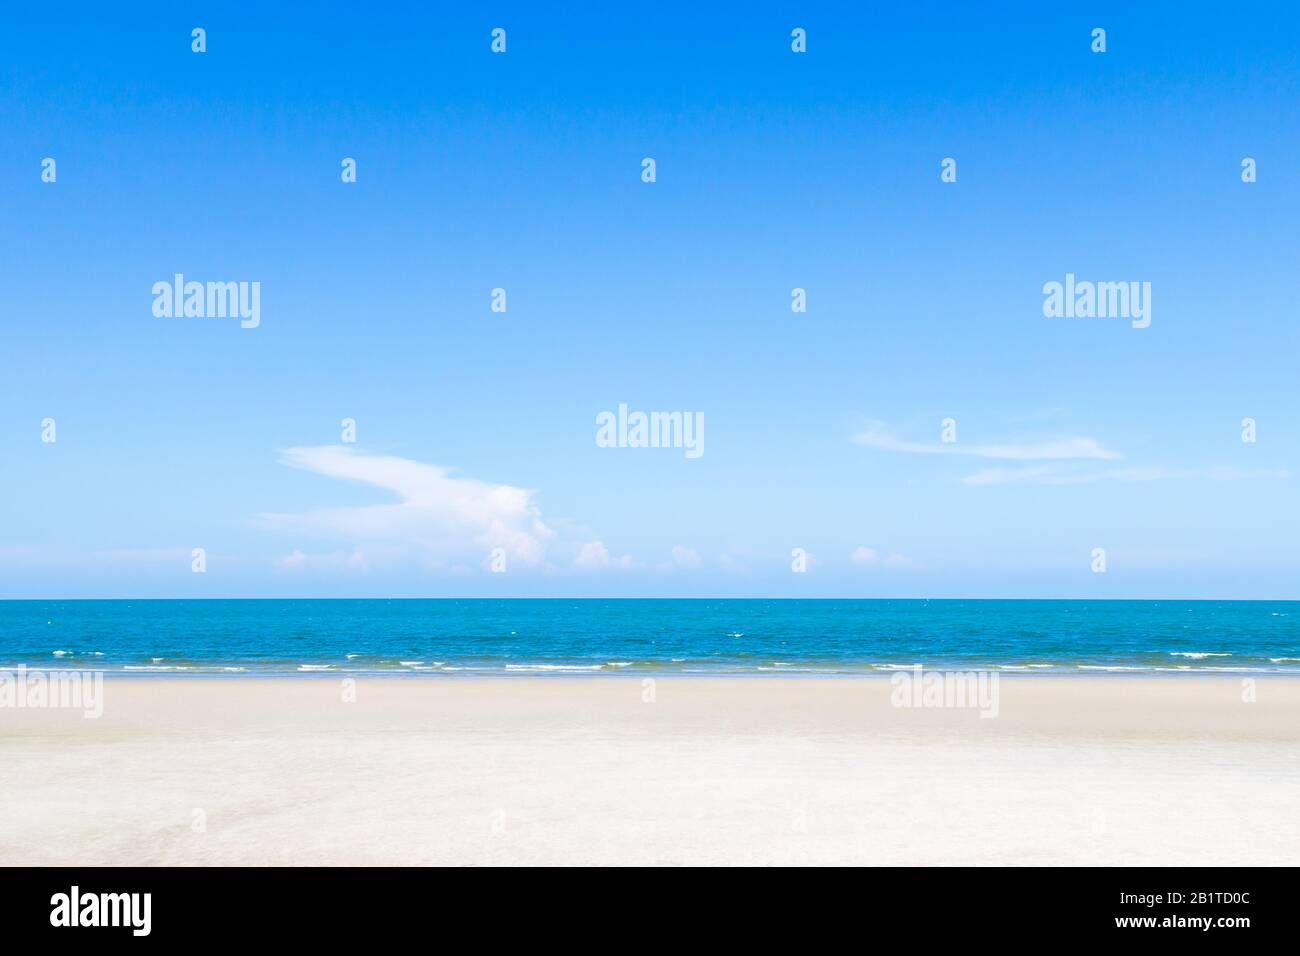 Tropical beach with white sand and blue sky, huahin thailand Stock Photo